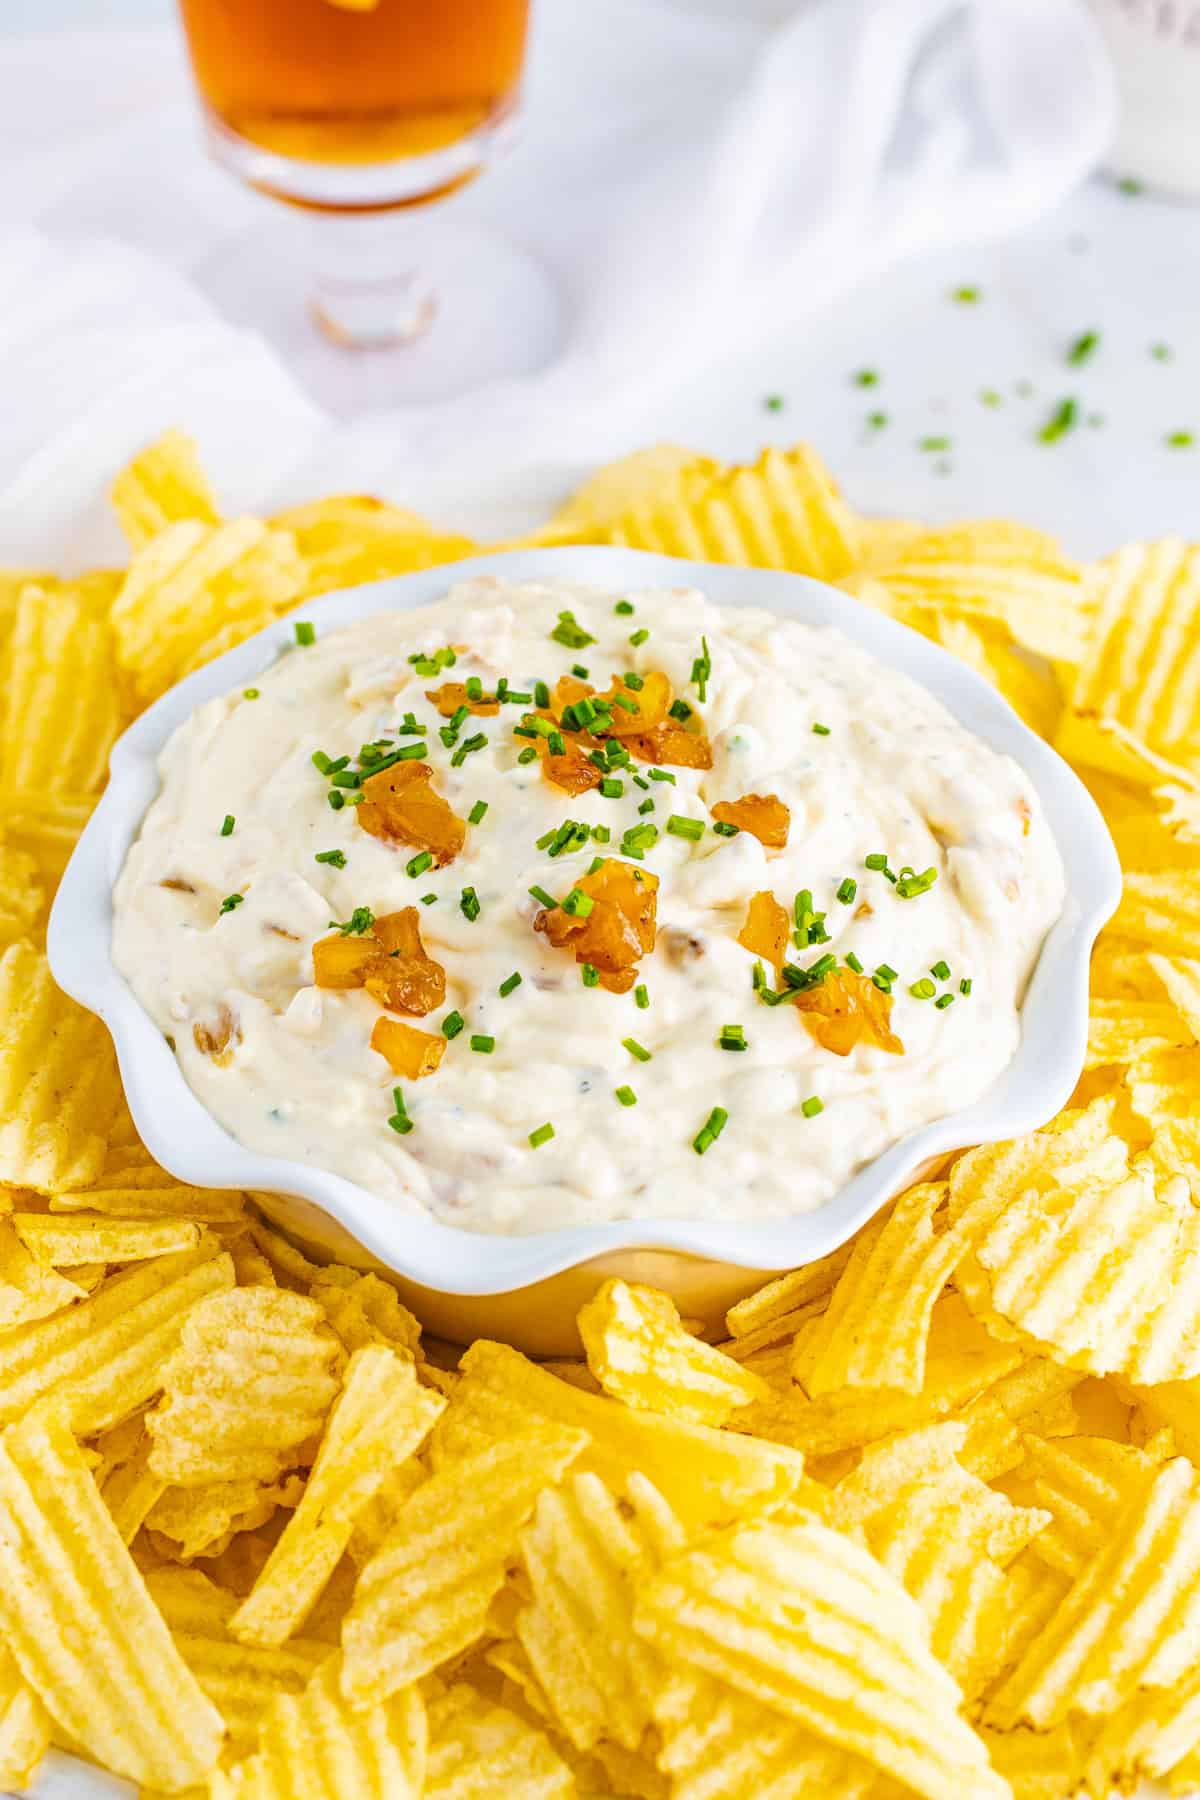 French onion dip garnished with chives in a bowl surrounded by crispy potato chips.